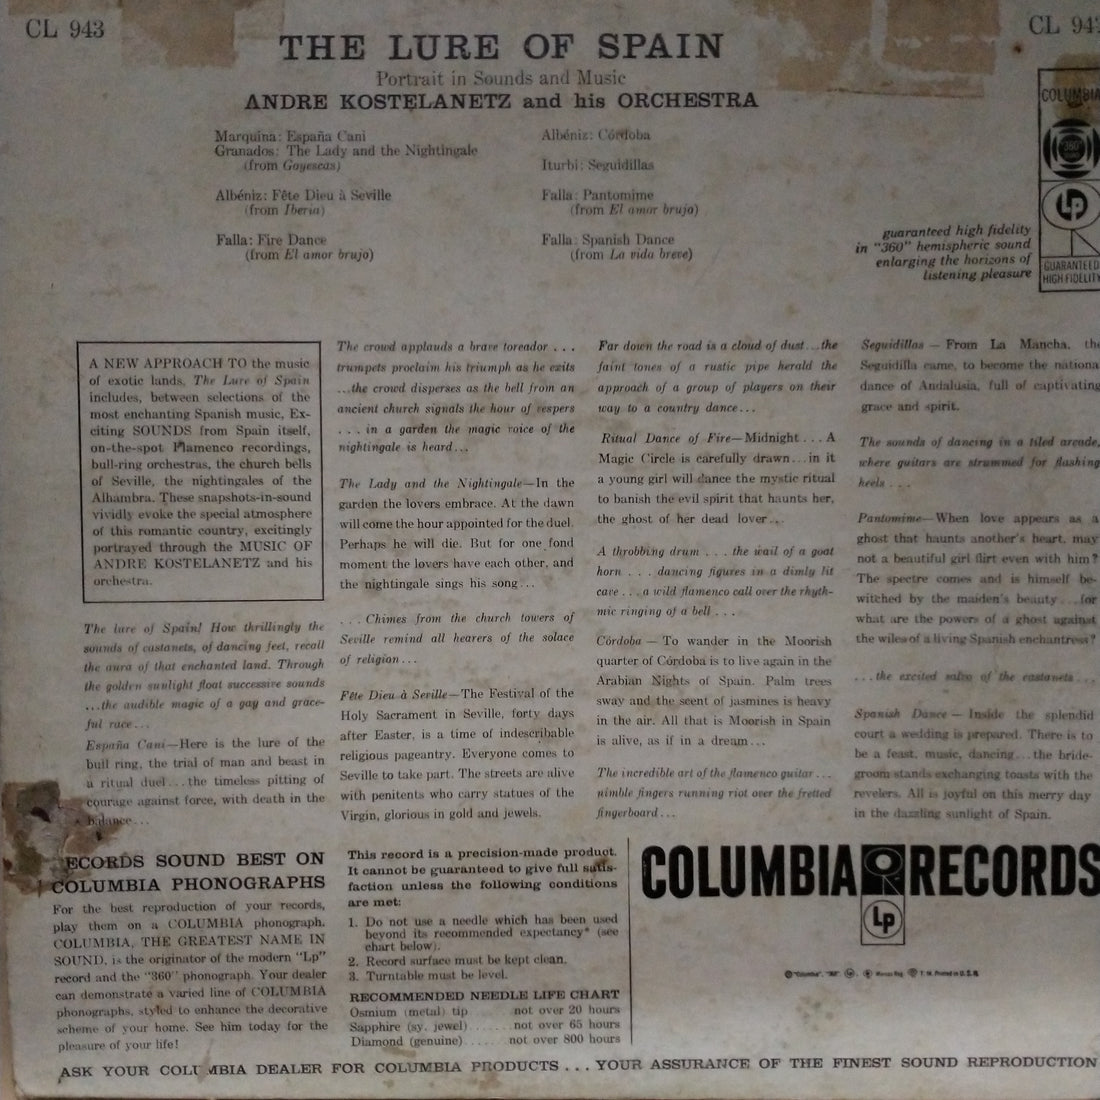 André Kostelanetz And His Orchestra - The Lure Of Spain (Vinyl) (VG)